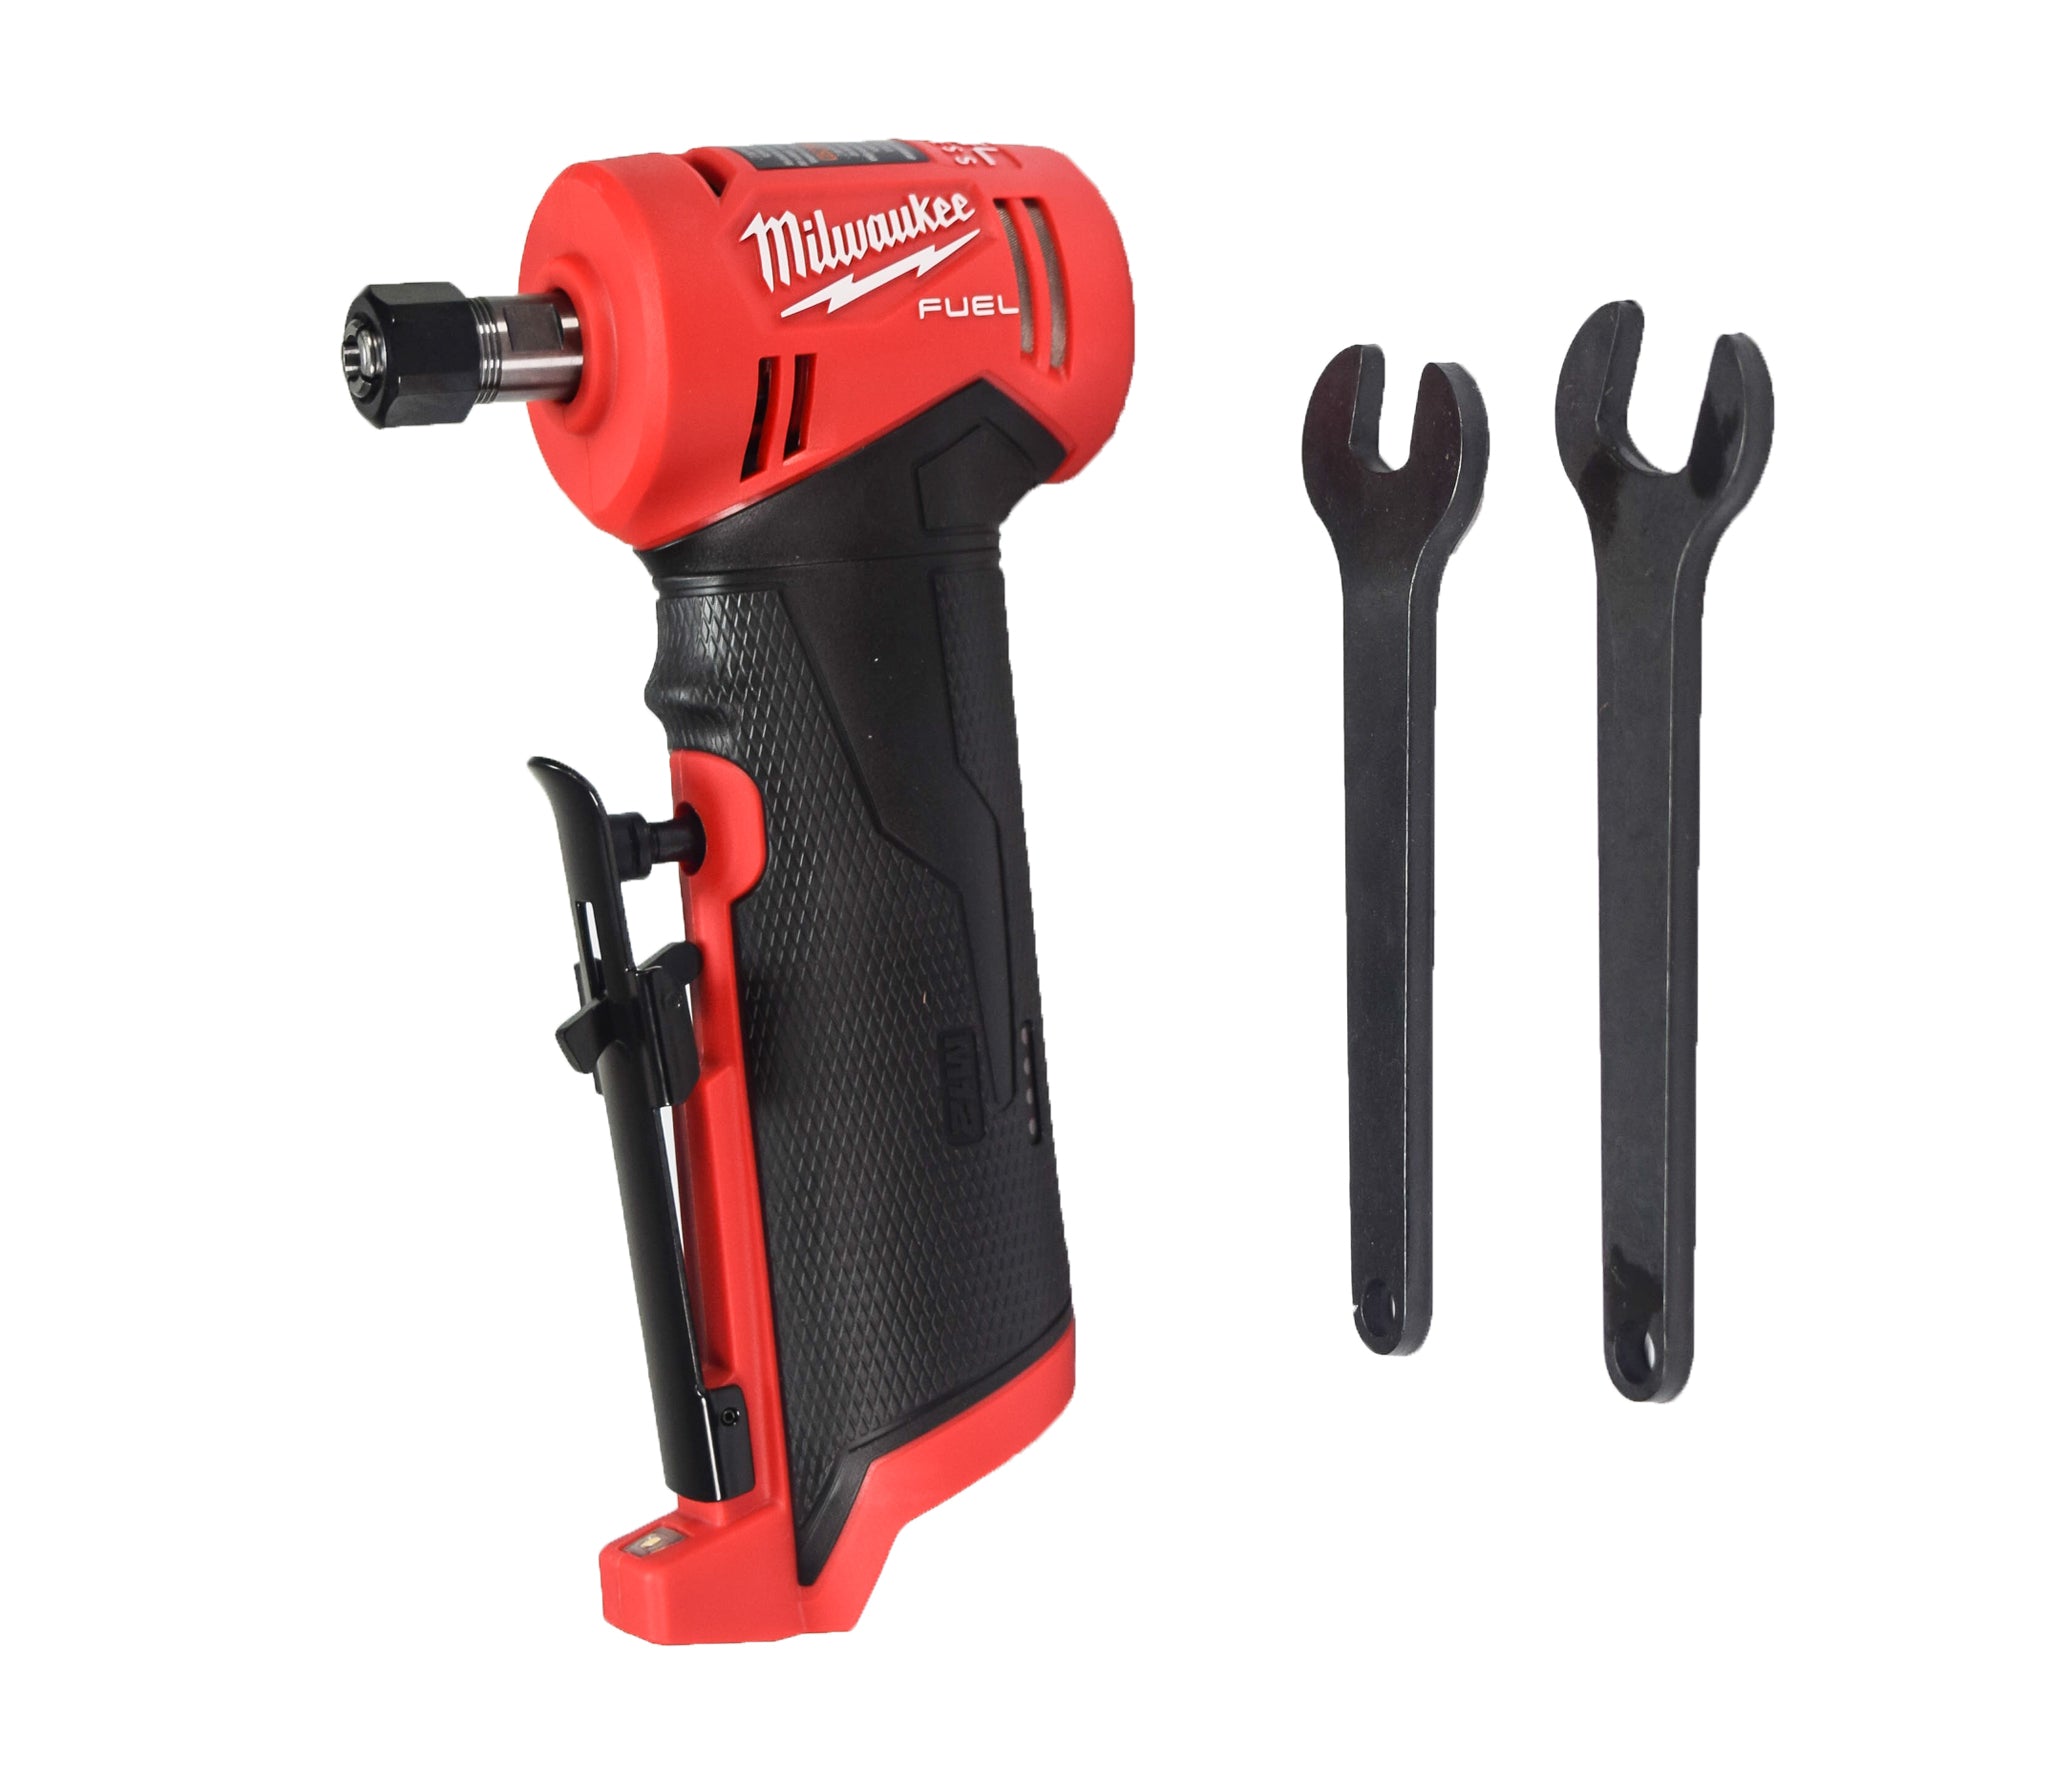 Milwaukee-M12-FUEL-12-Volt-Lithium-Ion-Brushless-Cordless-1-4-in.-Right-Angle-Die-Grinder-2485-20-Tool-Only-image-1